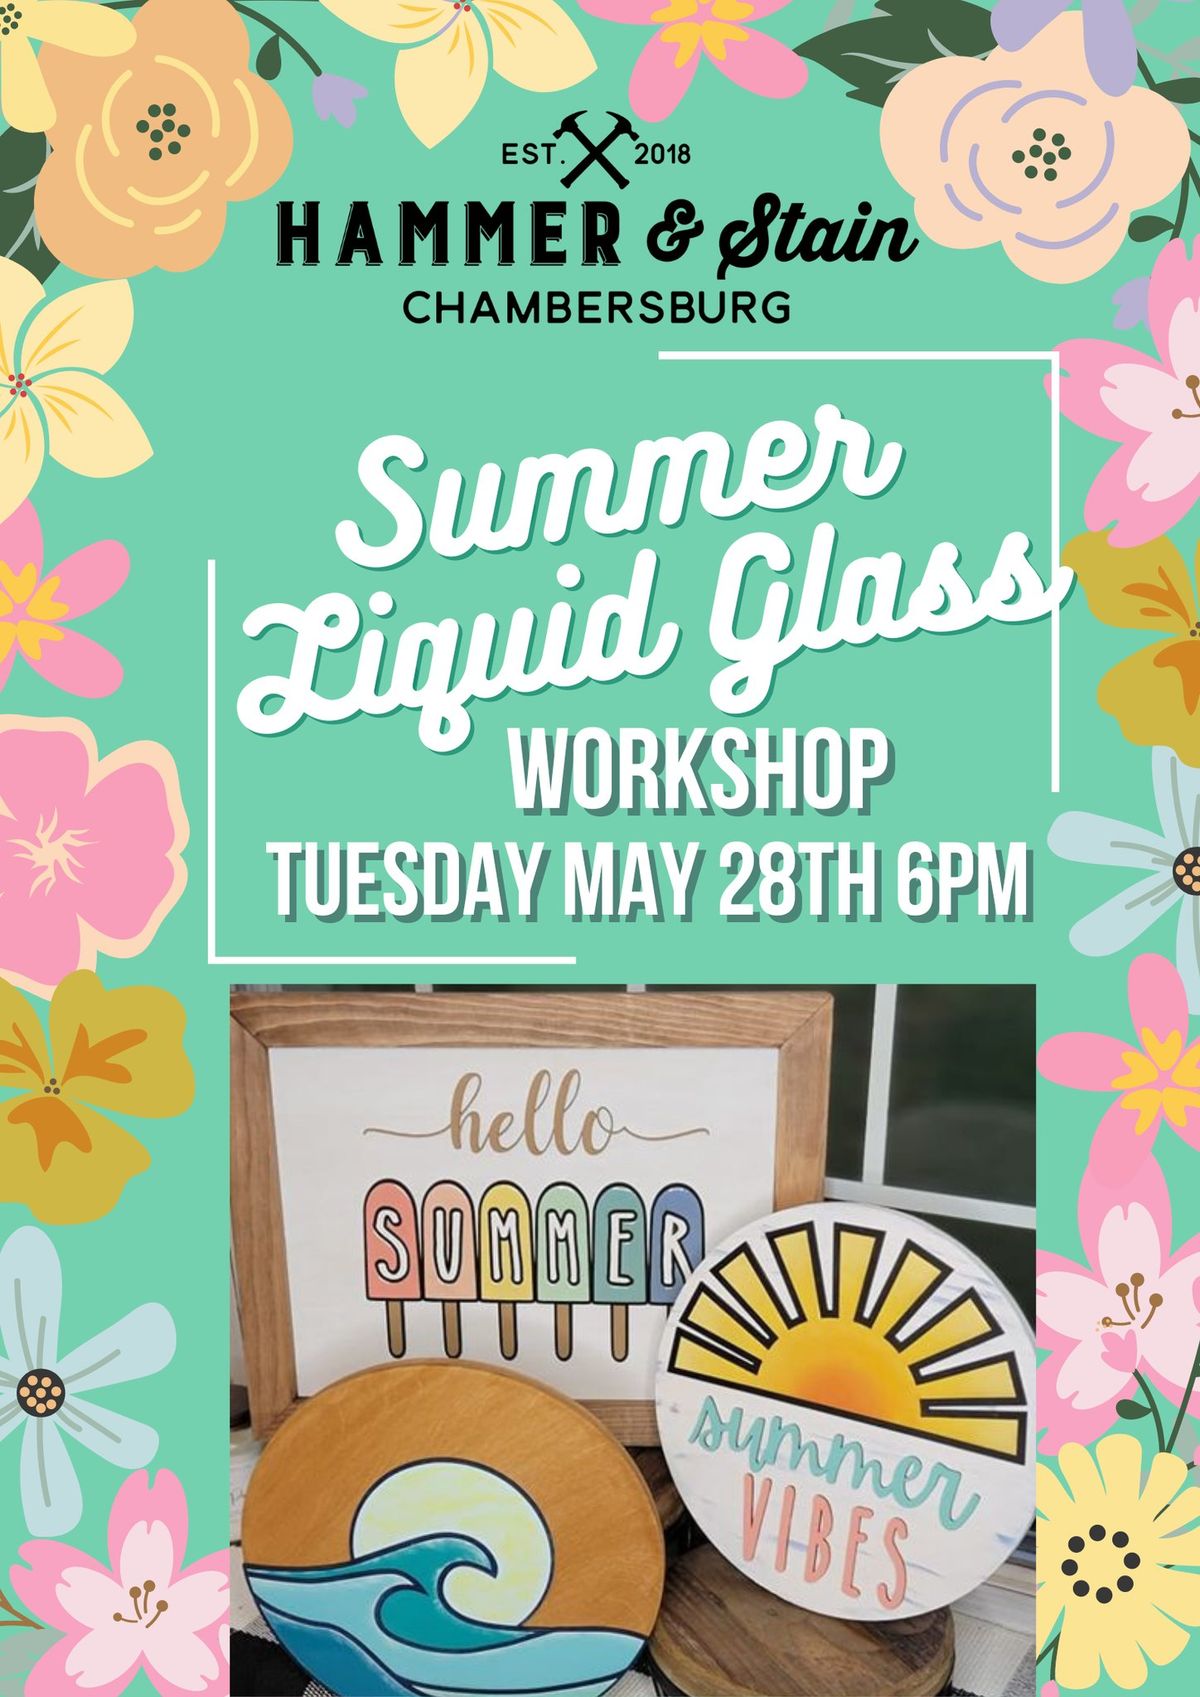 Tuesday May 28th- Summer Liquid Glass Workshop 6pm